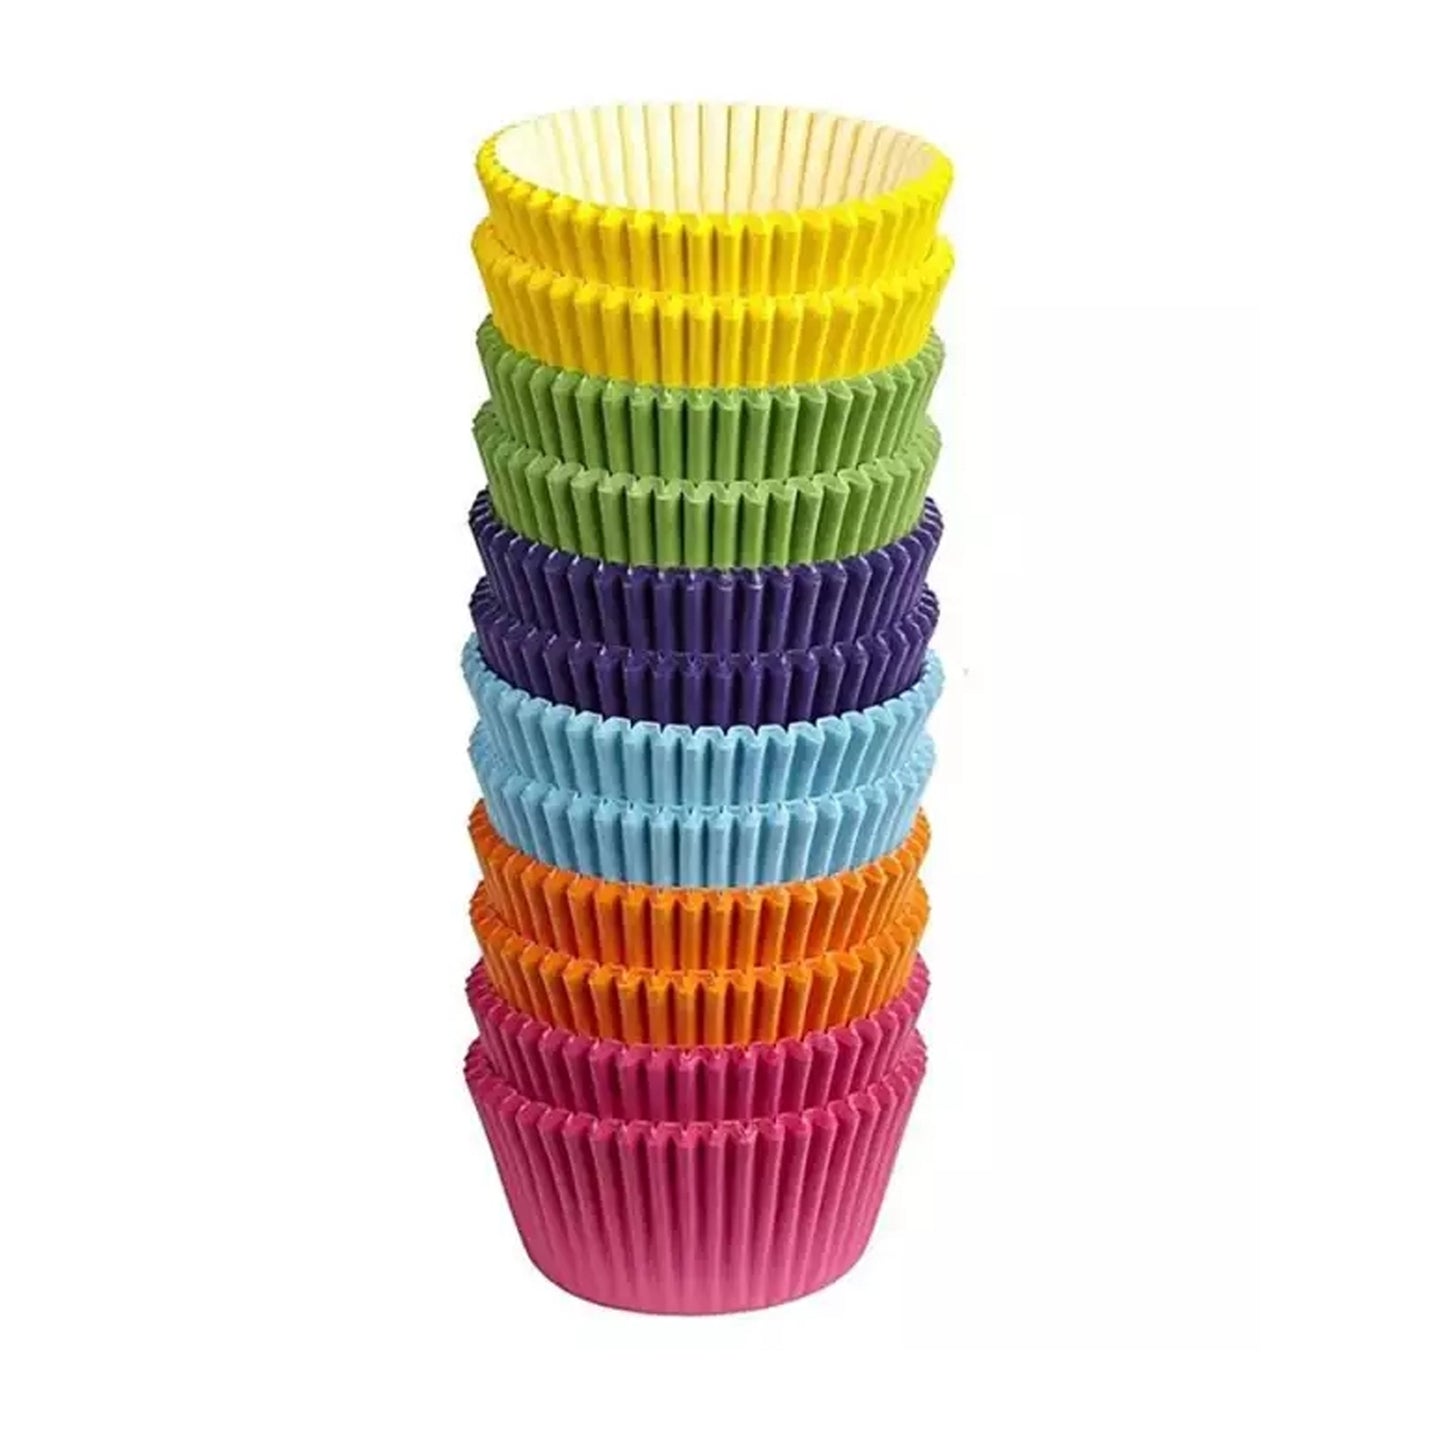 CUPCAKE LINERS (100 LINERS)